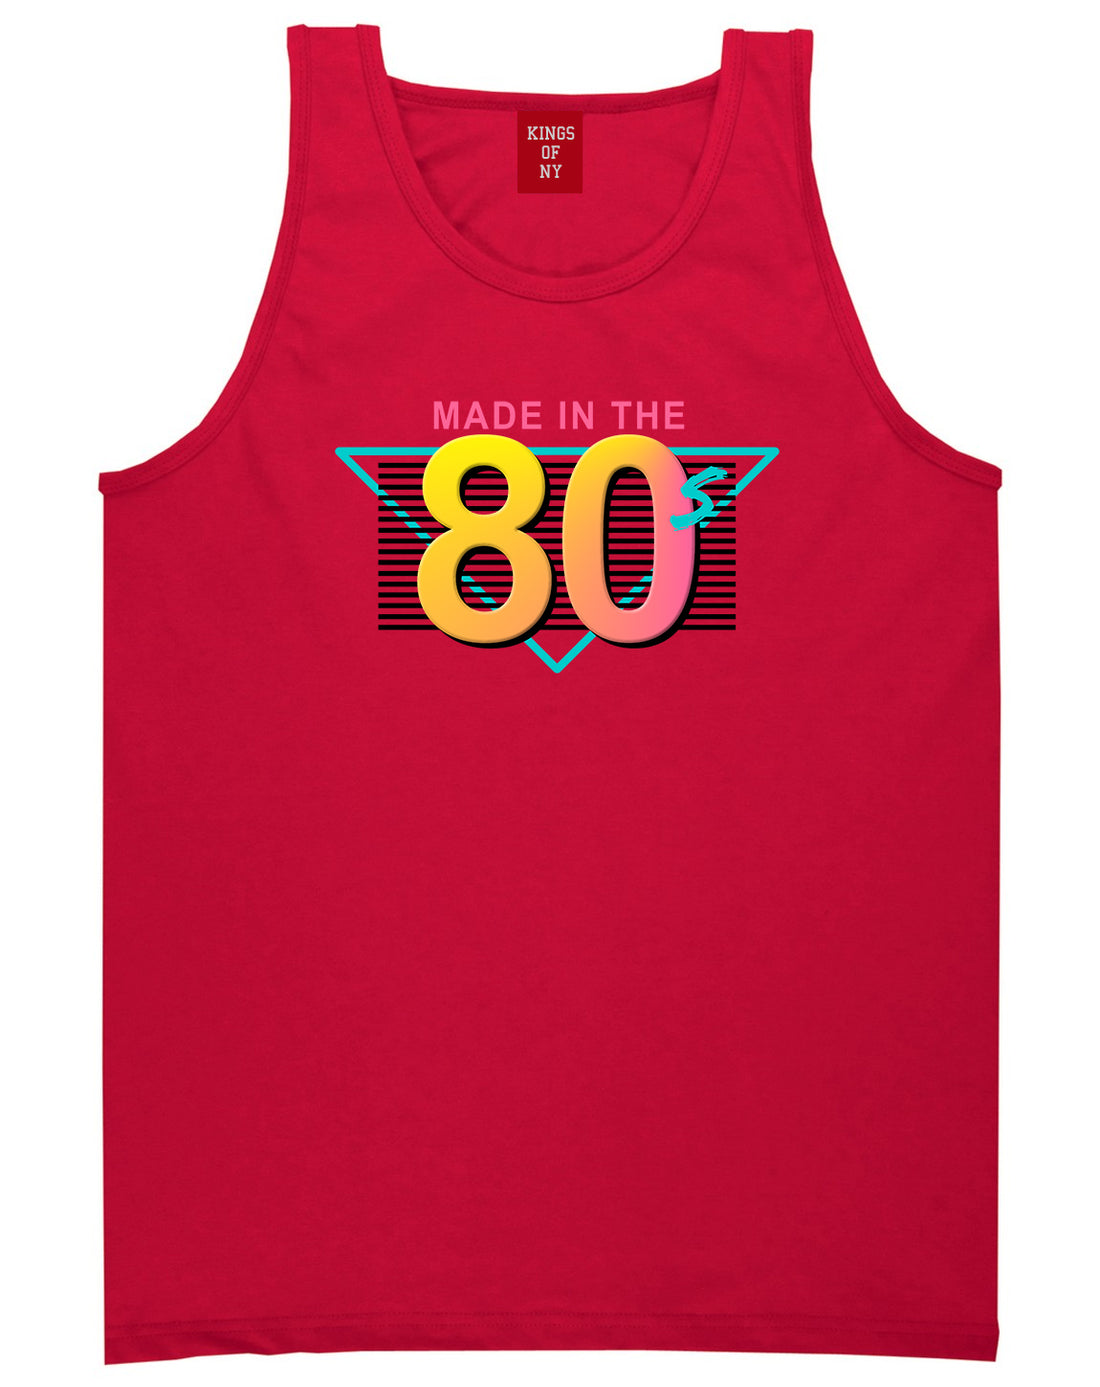 Made In The 80s Retro Mens Tank Top Shirt Red by Kings Of NY